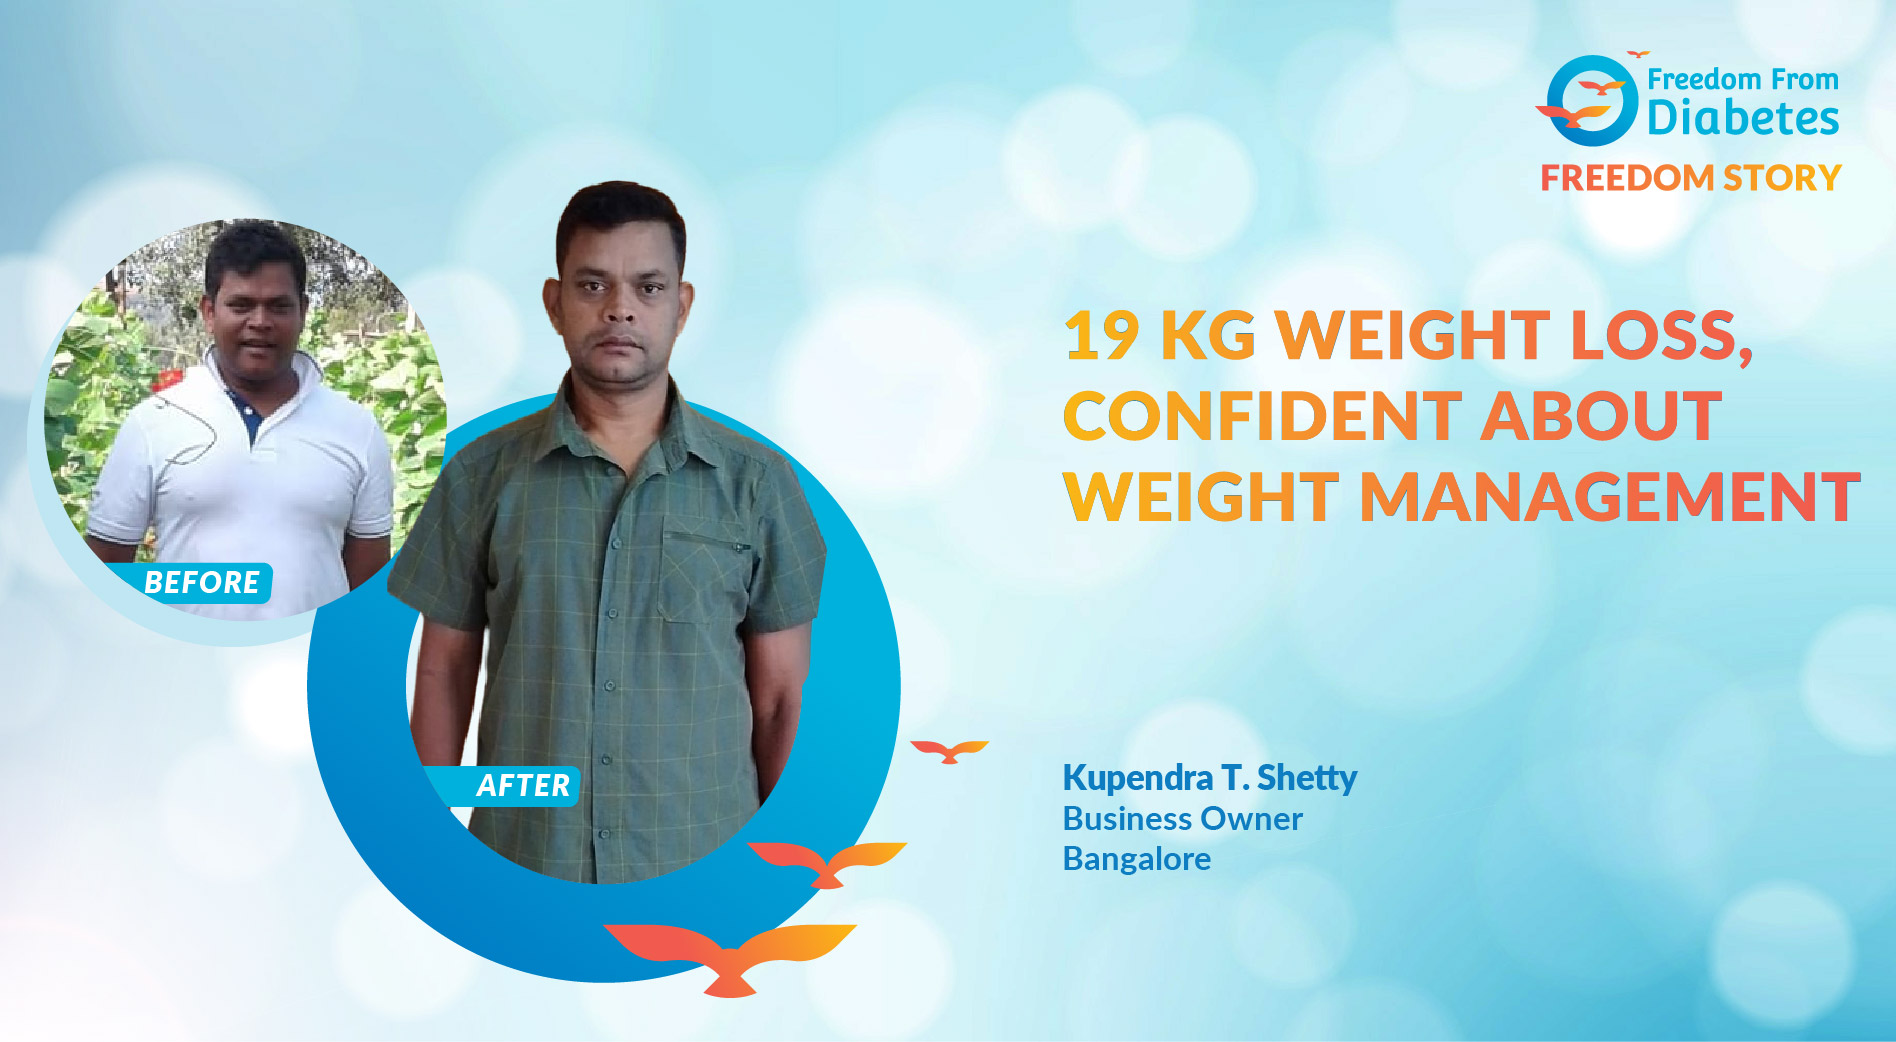 Incredible weight loss story from Bangalore